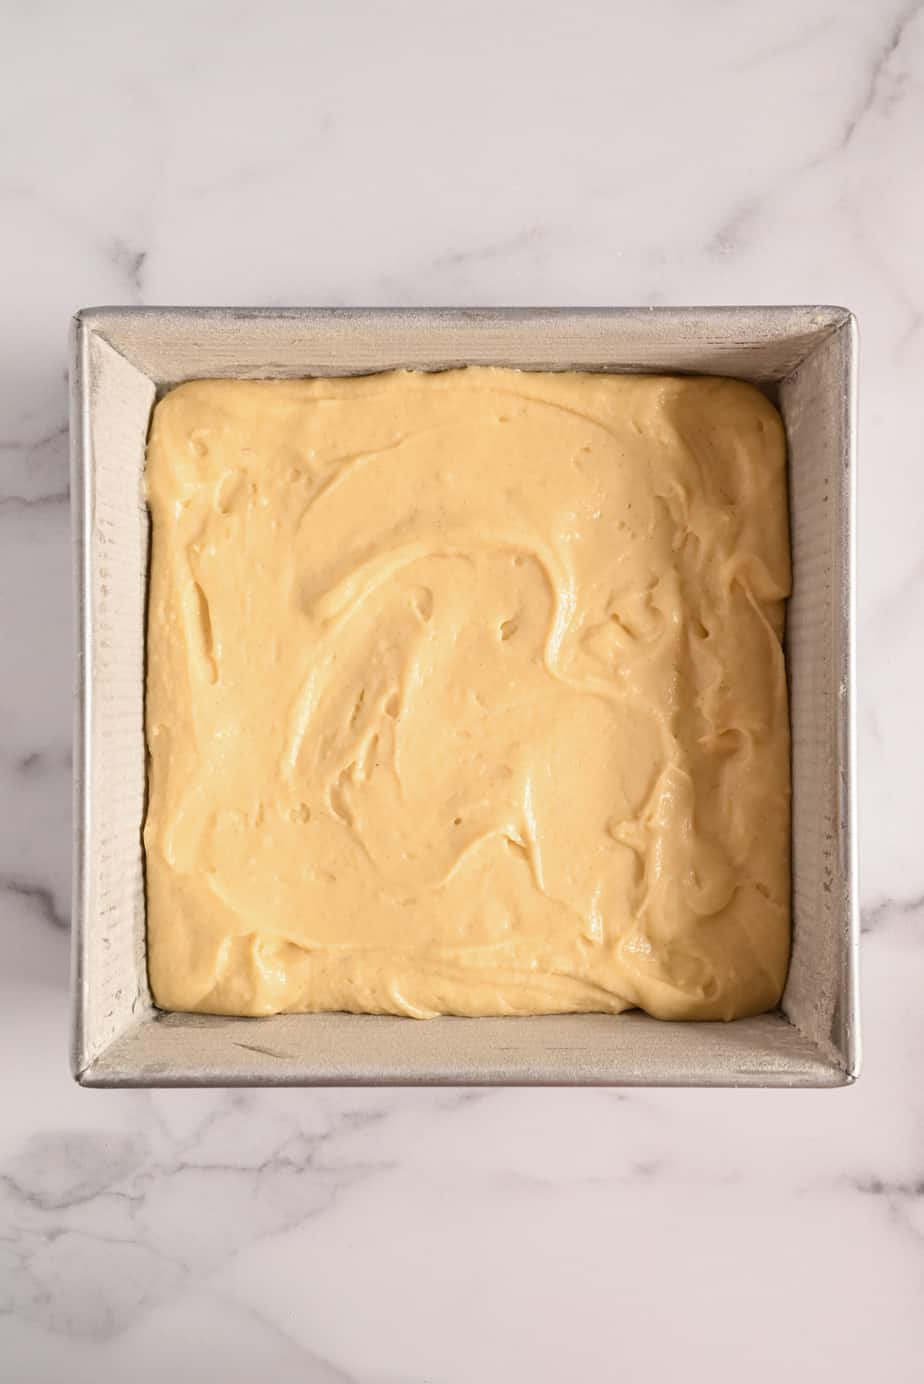 Yellow cake batter in a square cake pan, ready to go in the oven.